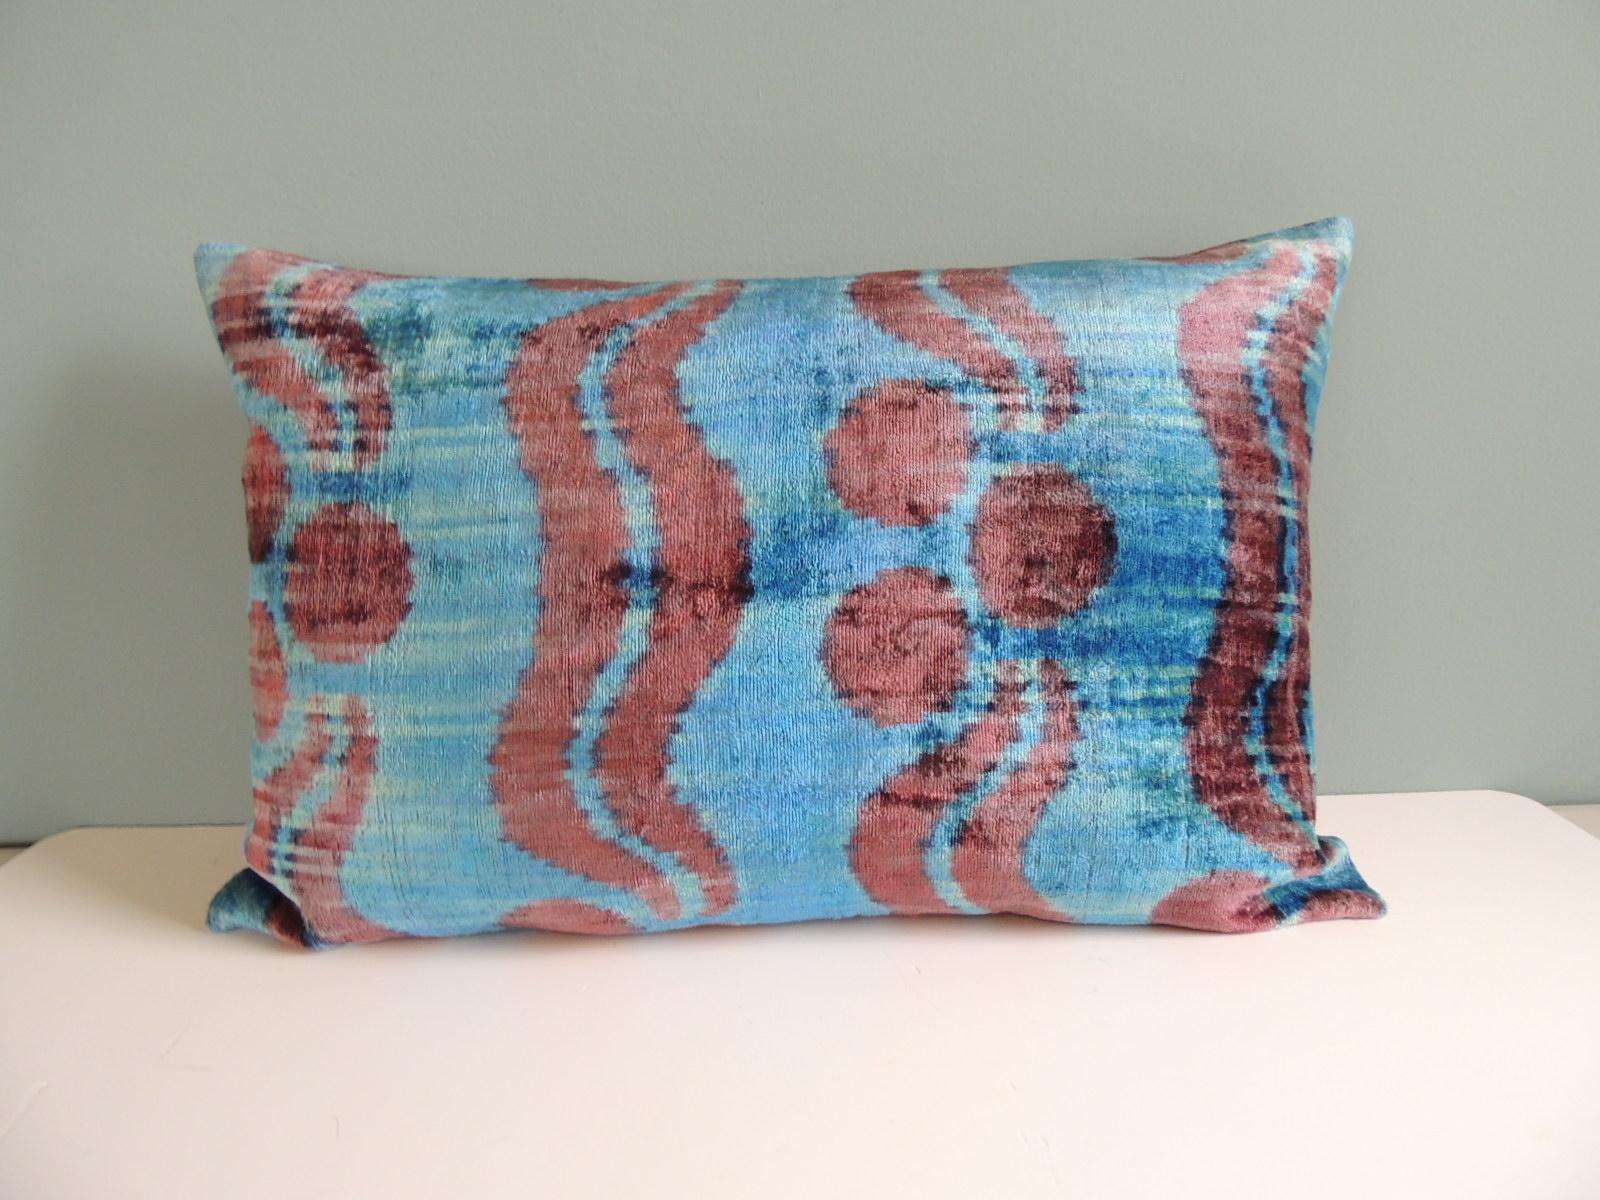 Ikat blue and pink decorative bolster pillow with hot pink linen backing.
Decorative pillow handcrafted and designed in the USA.
Closure by stitch (no zipper closure) with custom-made feather/Down pillow insert.
Size: 16